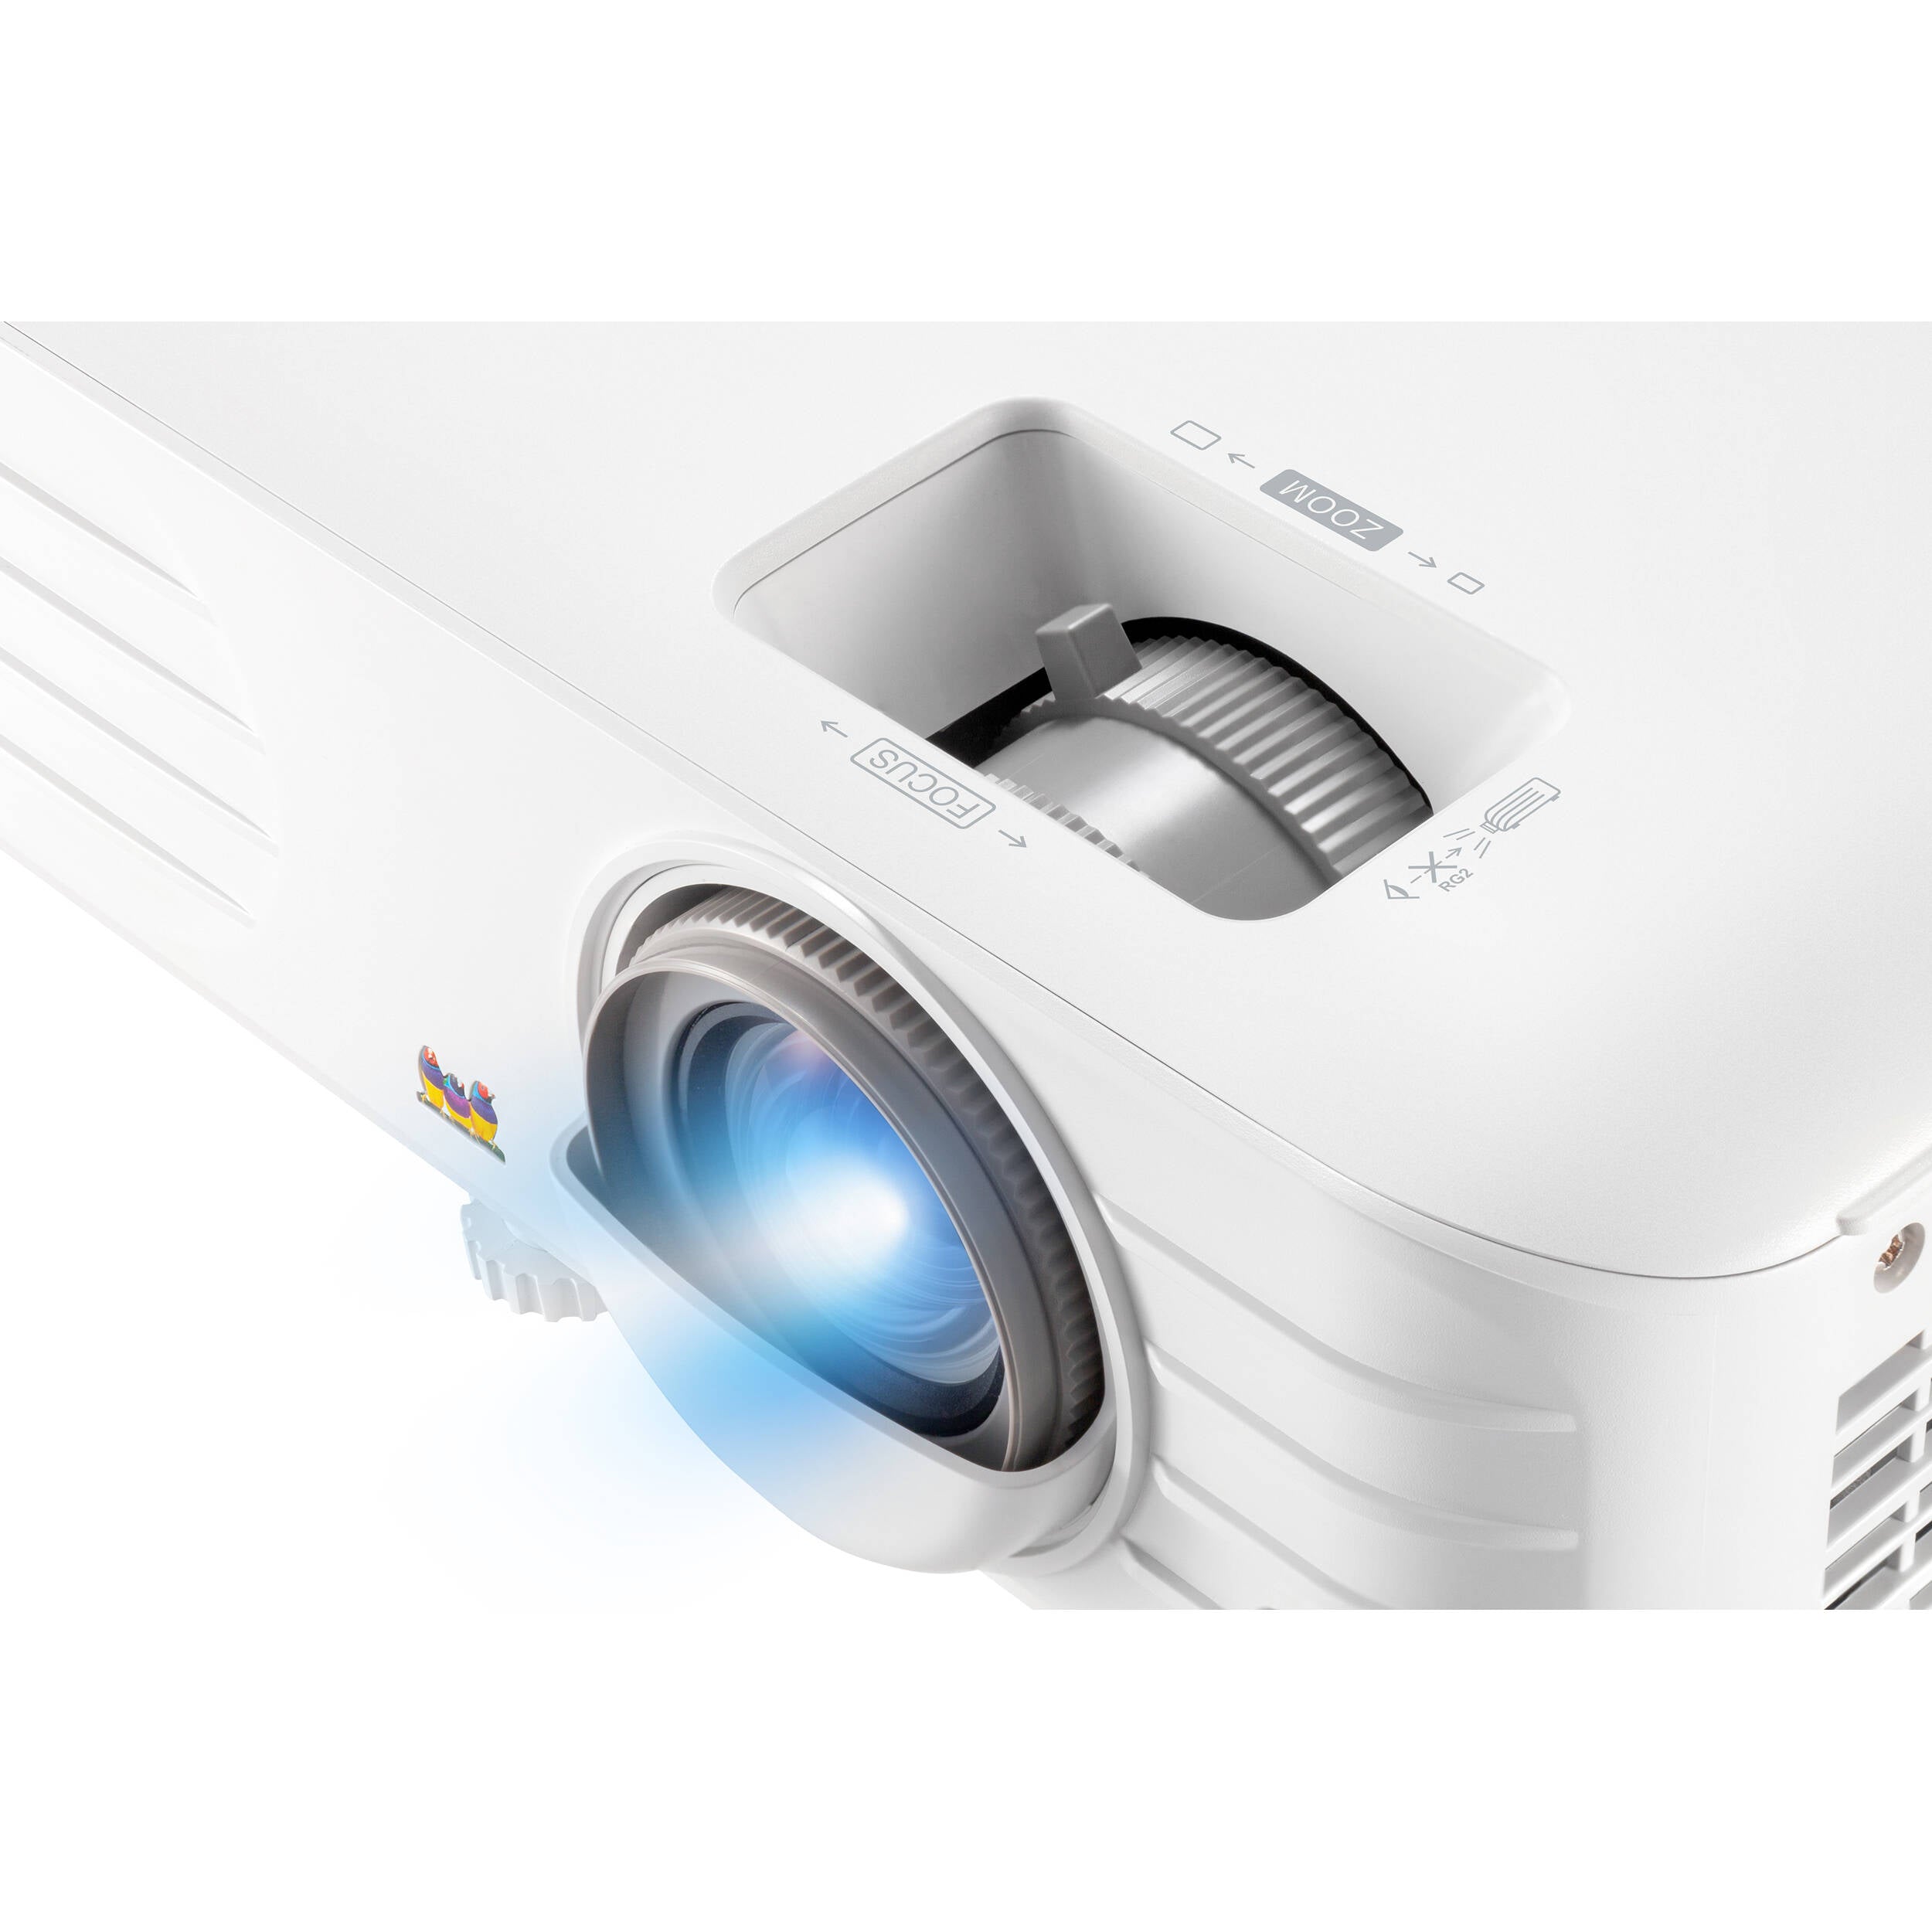 ViewSonic PX703HDH-S 1080p 3500 Lumens Projector - Certified Refurbished